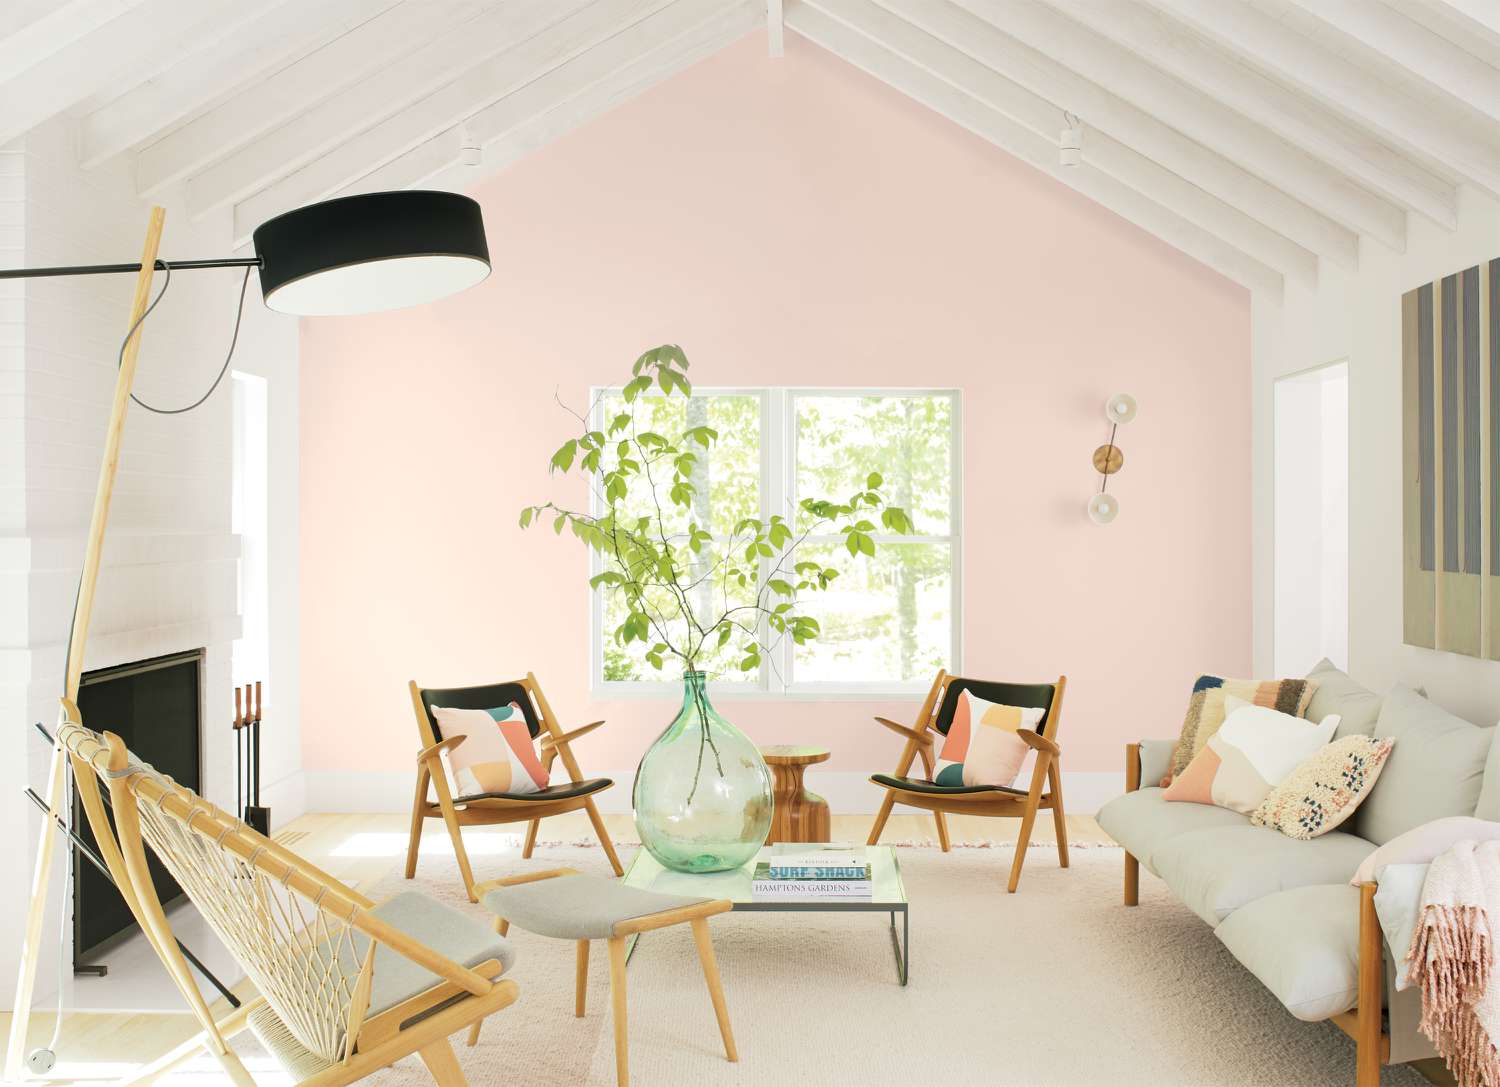 Paint Company Predictions For 2020 Color Of The Year